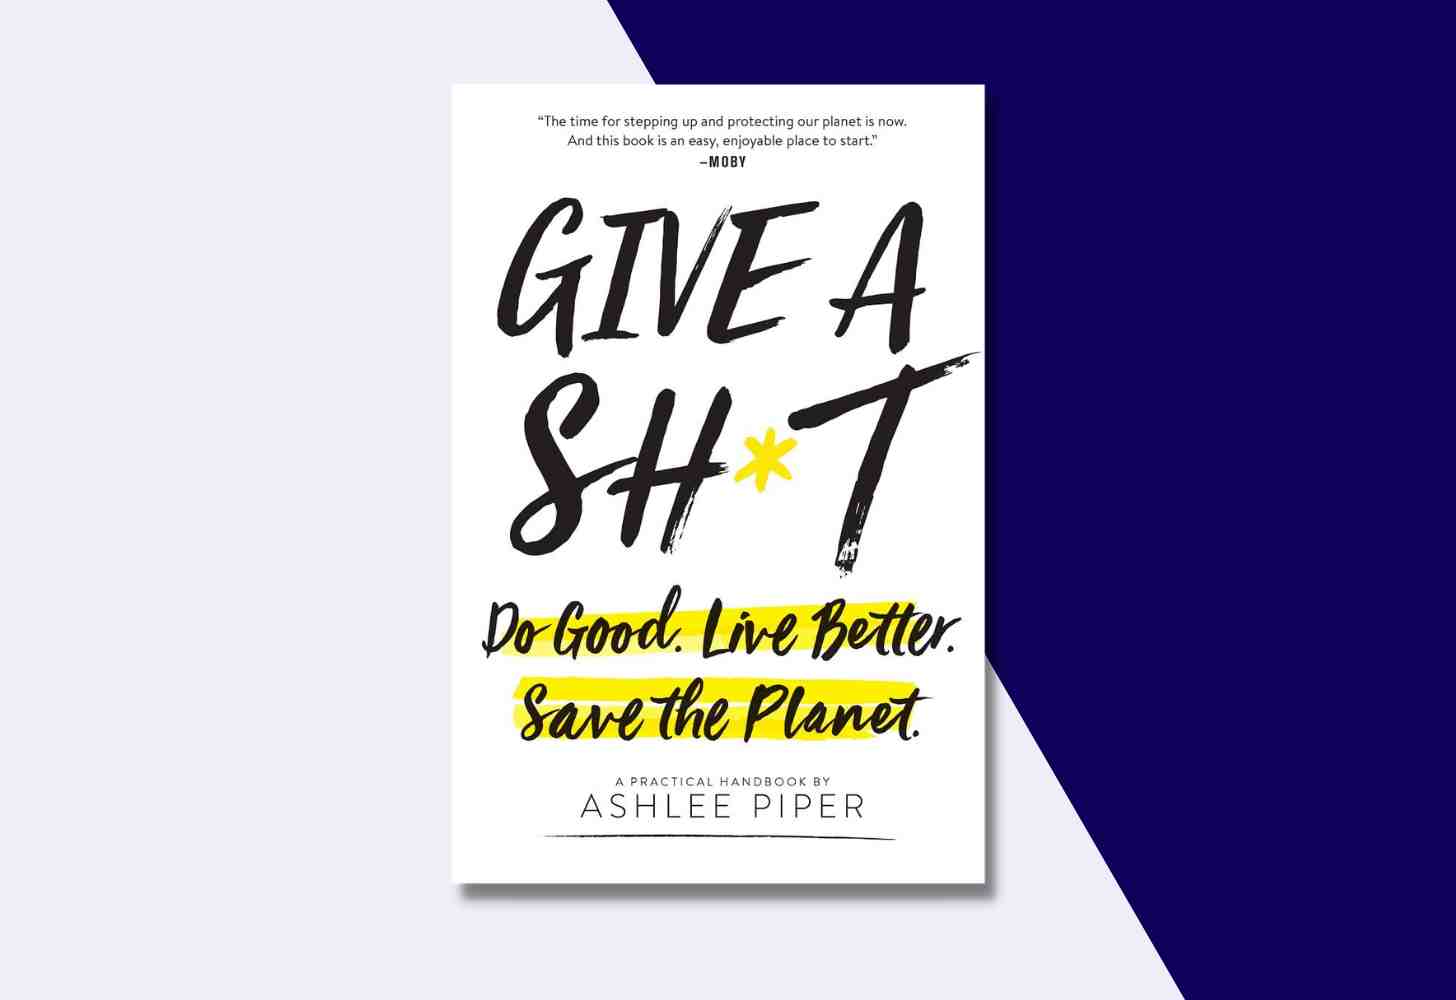 The Cover Of: “Give a Sh*t: Do Good. Live Better. Save the Planet.” by Ashlee Piper